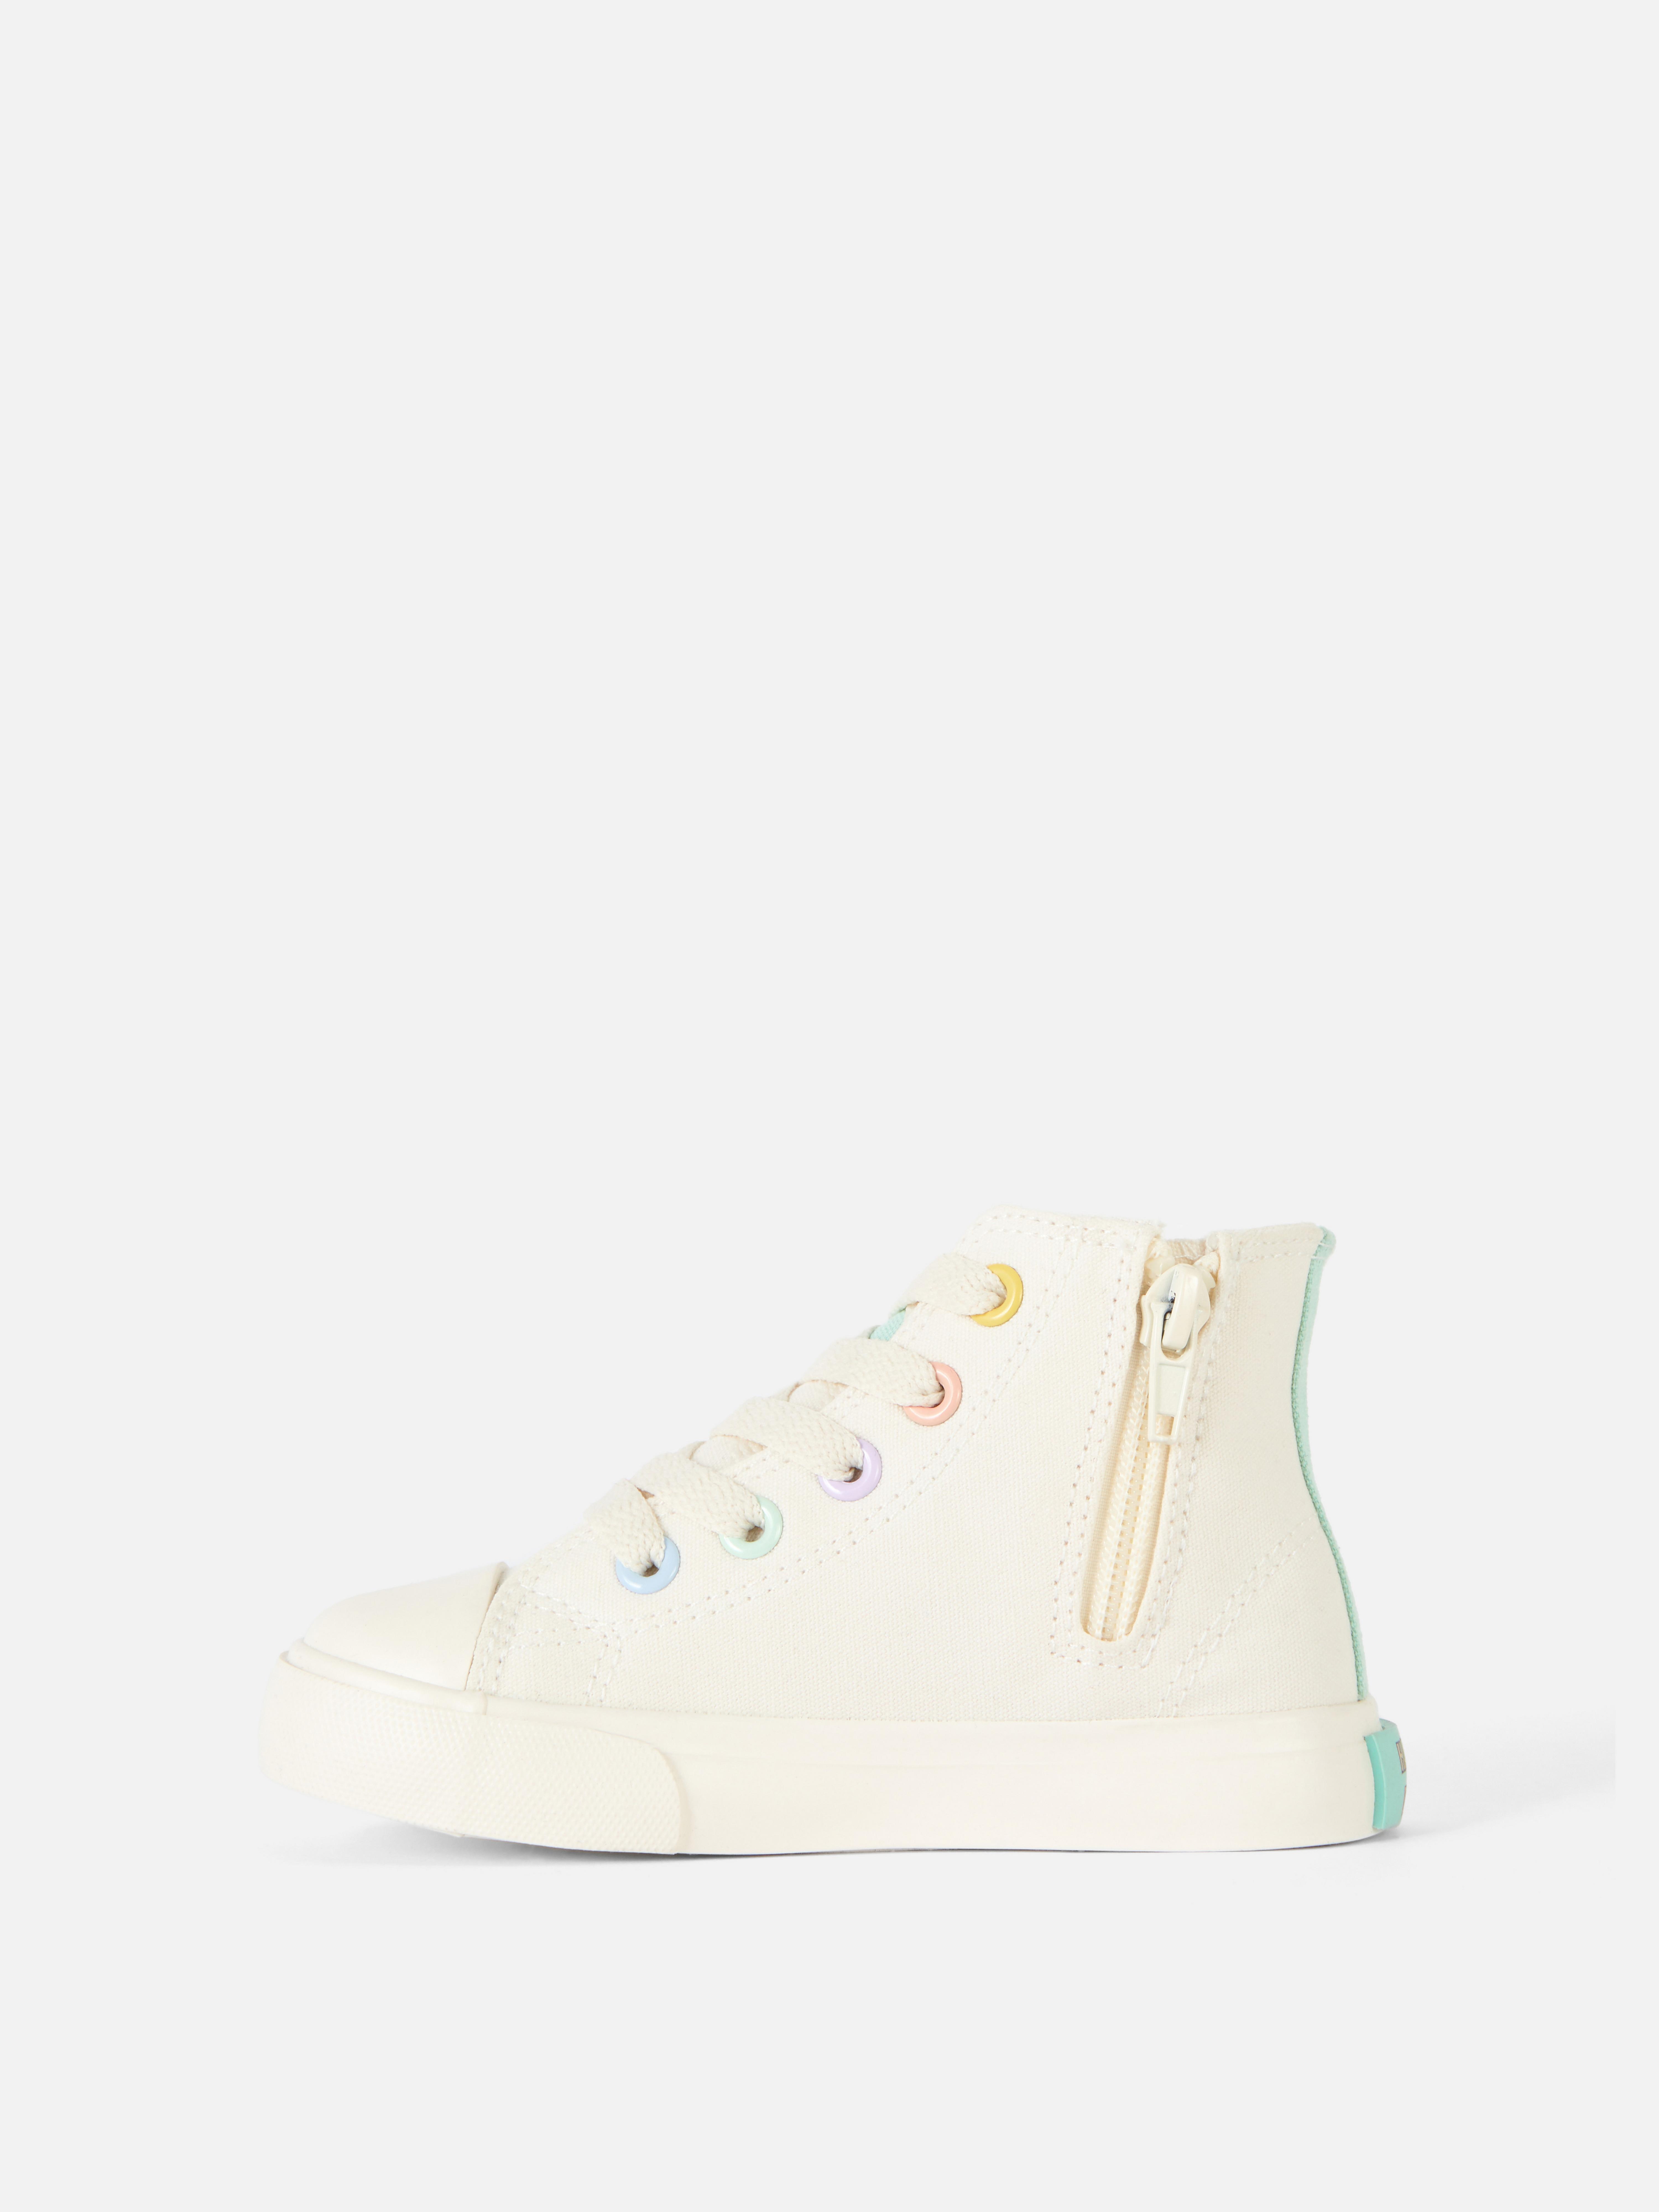 Stacey Solomon Canvas High Top Trainers